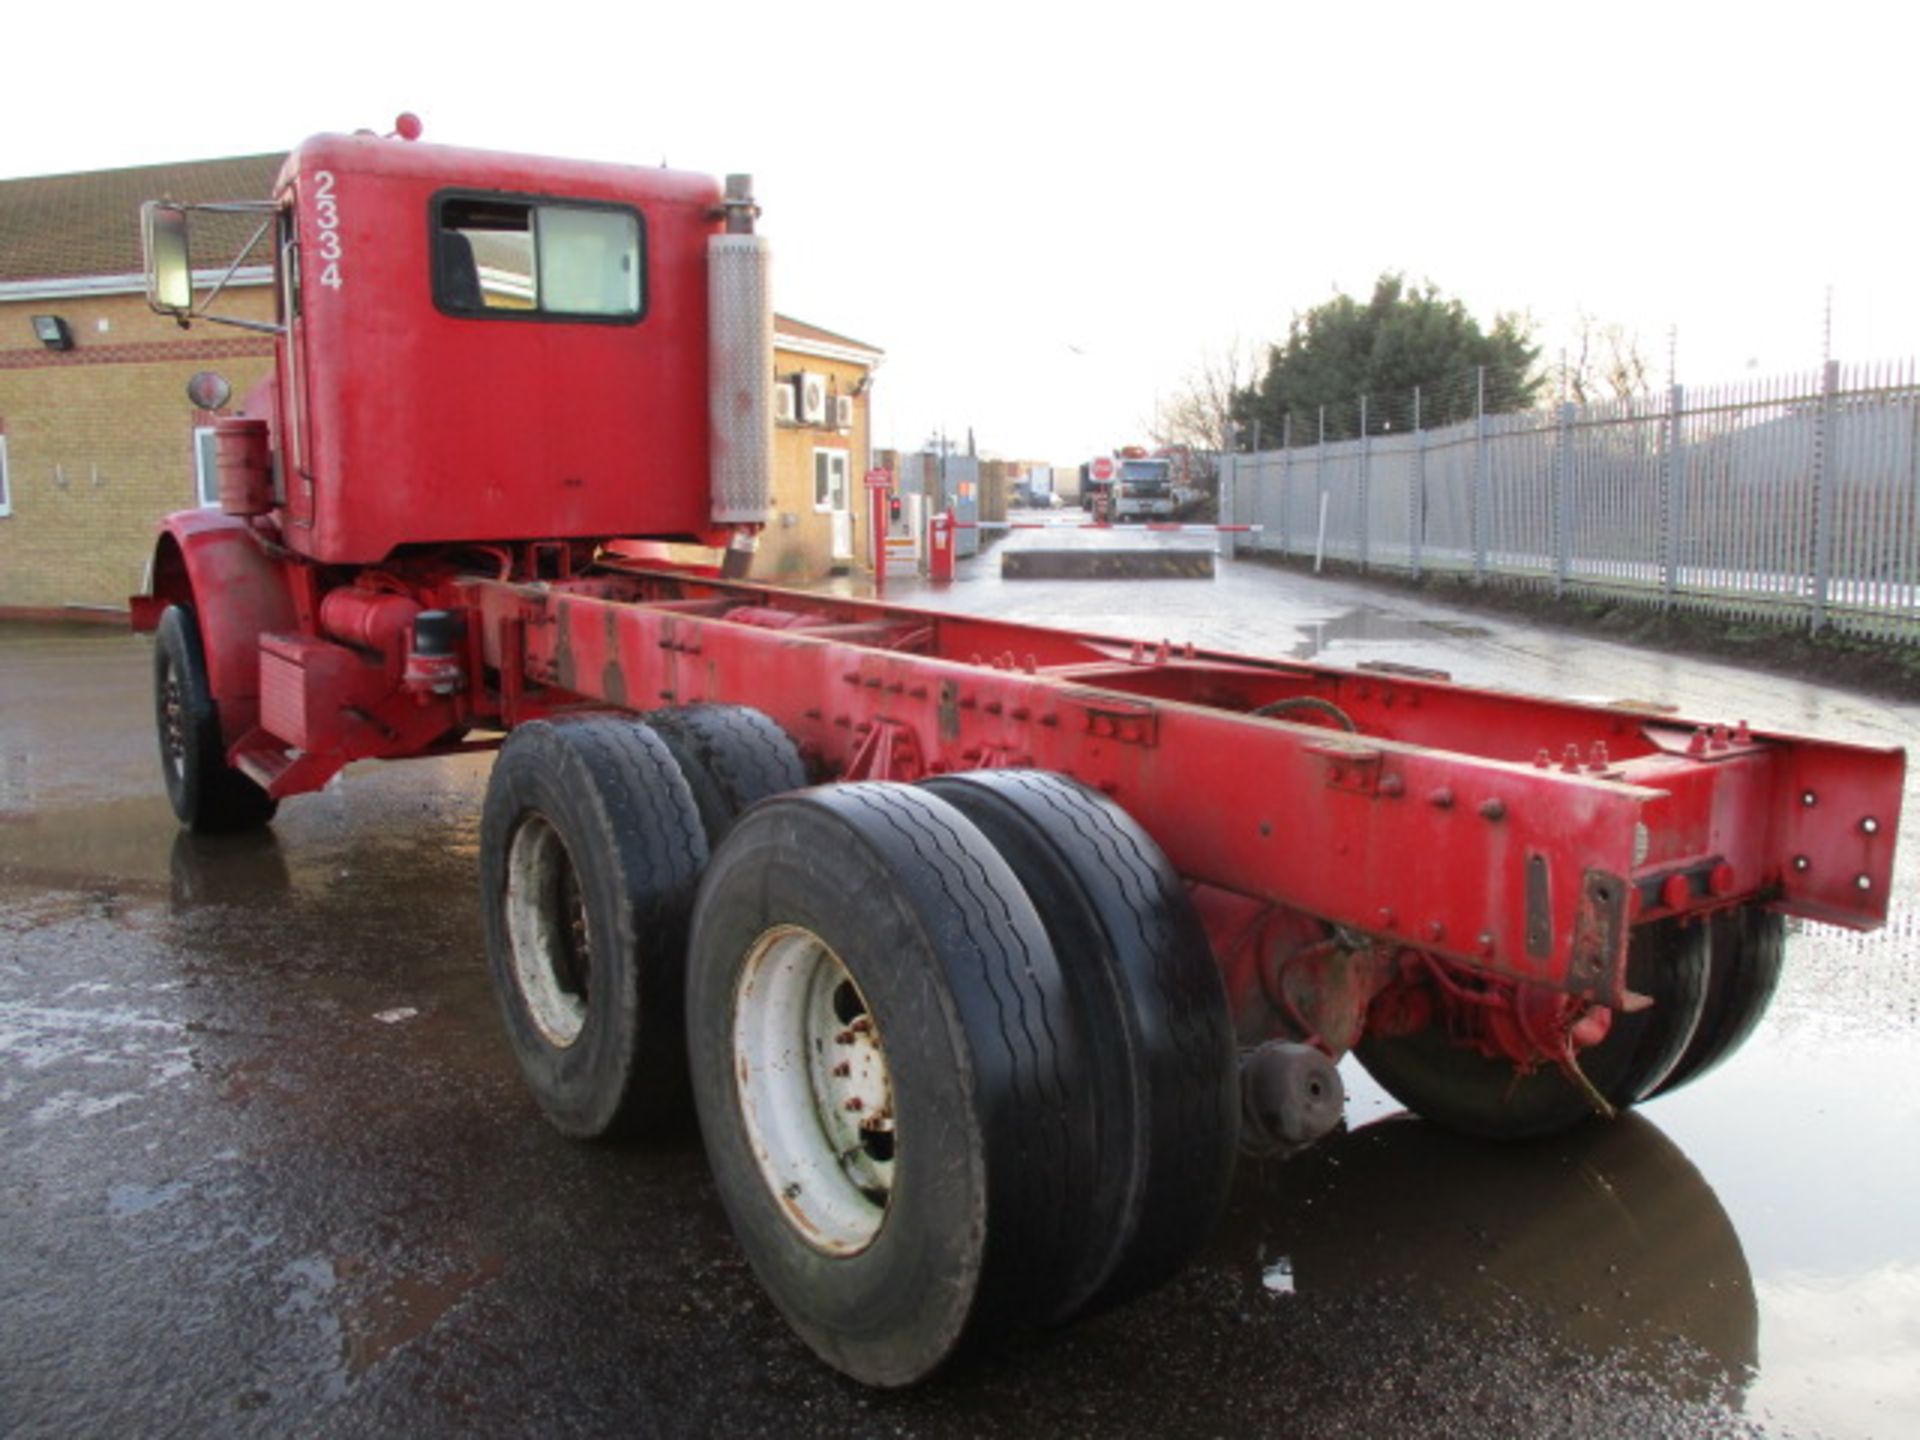 PETERBILT 357 Day Cab Diesel - VIN: 1XPAMA0X6TN409329 - Year: 1996 - 202,962 miles - 6x6 Chassis - Image 4 of 11